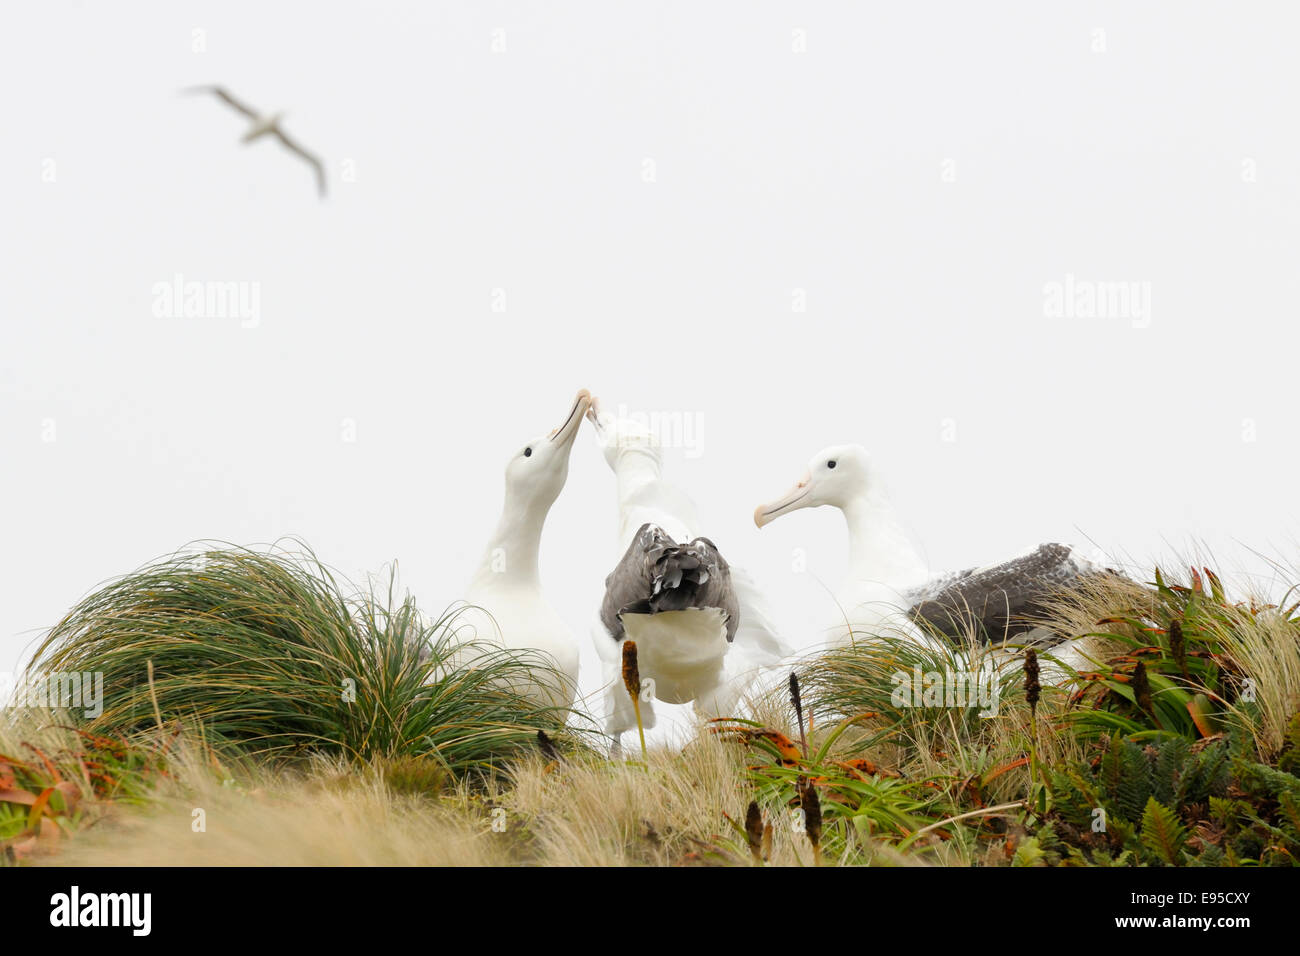 Southern Royal Albatrosses (Diomedea epomophora) displaying at courtship in grass, sub-antarctic Campbell island, New Zealand. Stock Photo